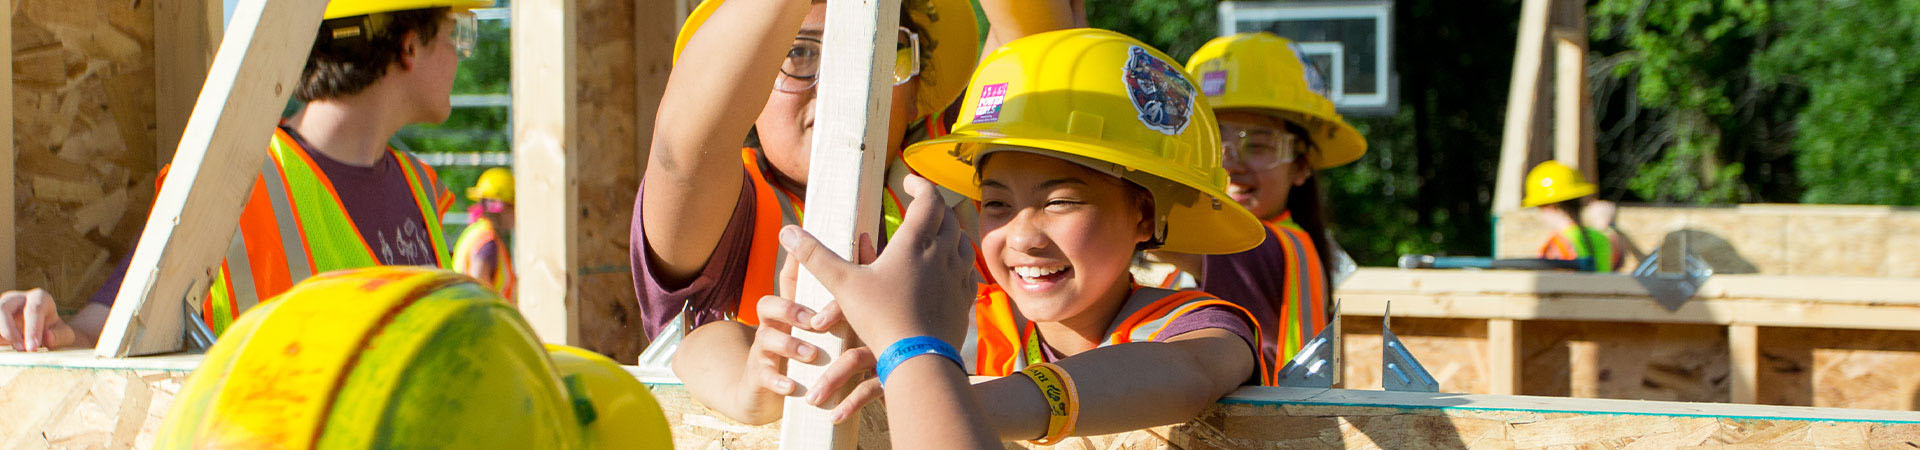  Girl Scouts in hard hats helping to build a structure 